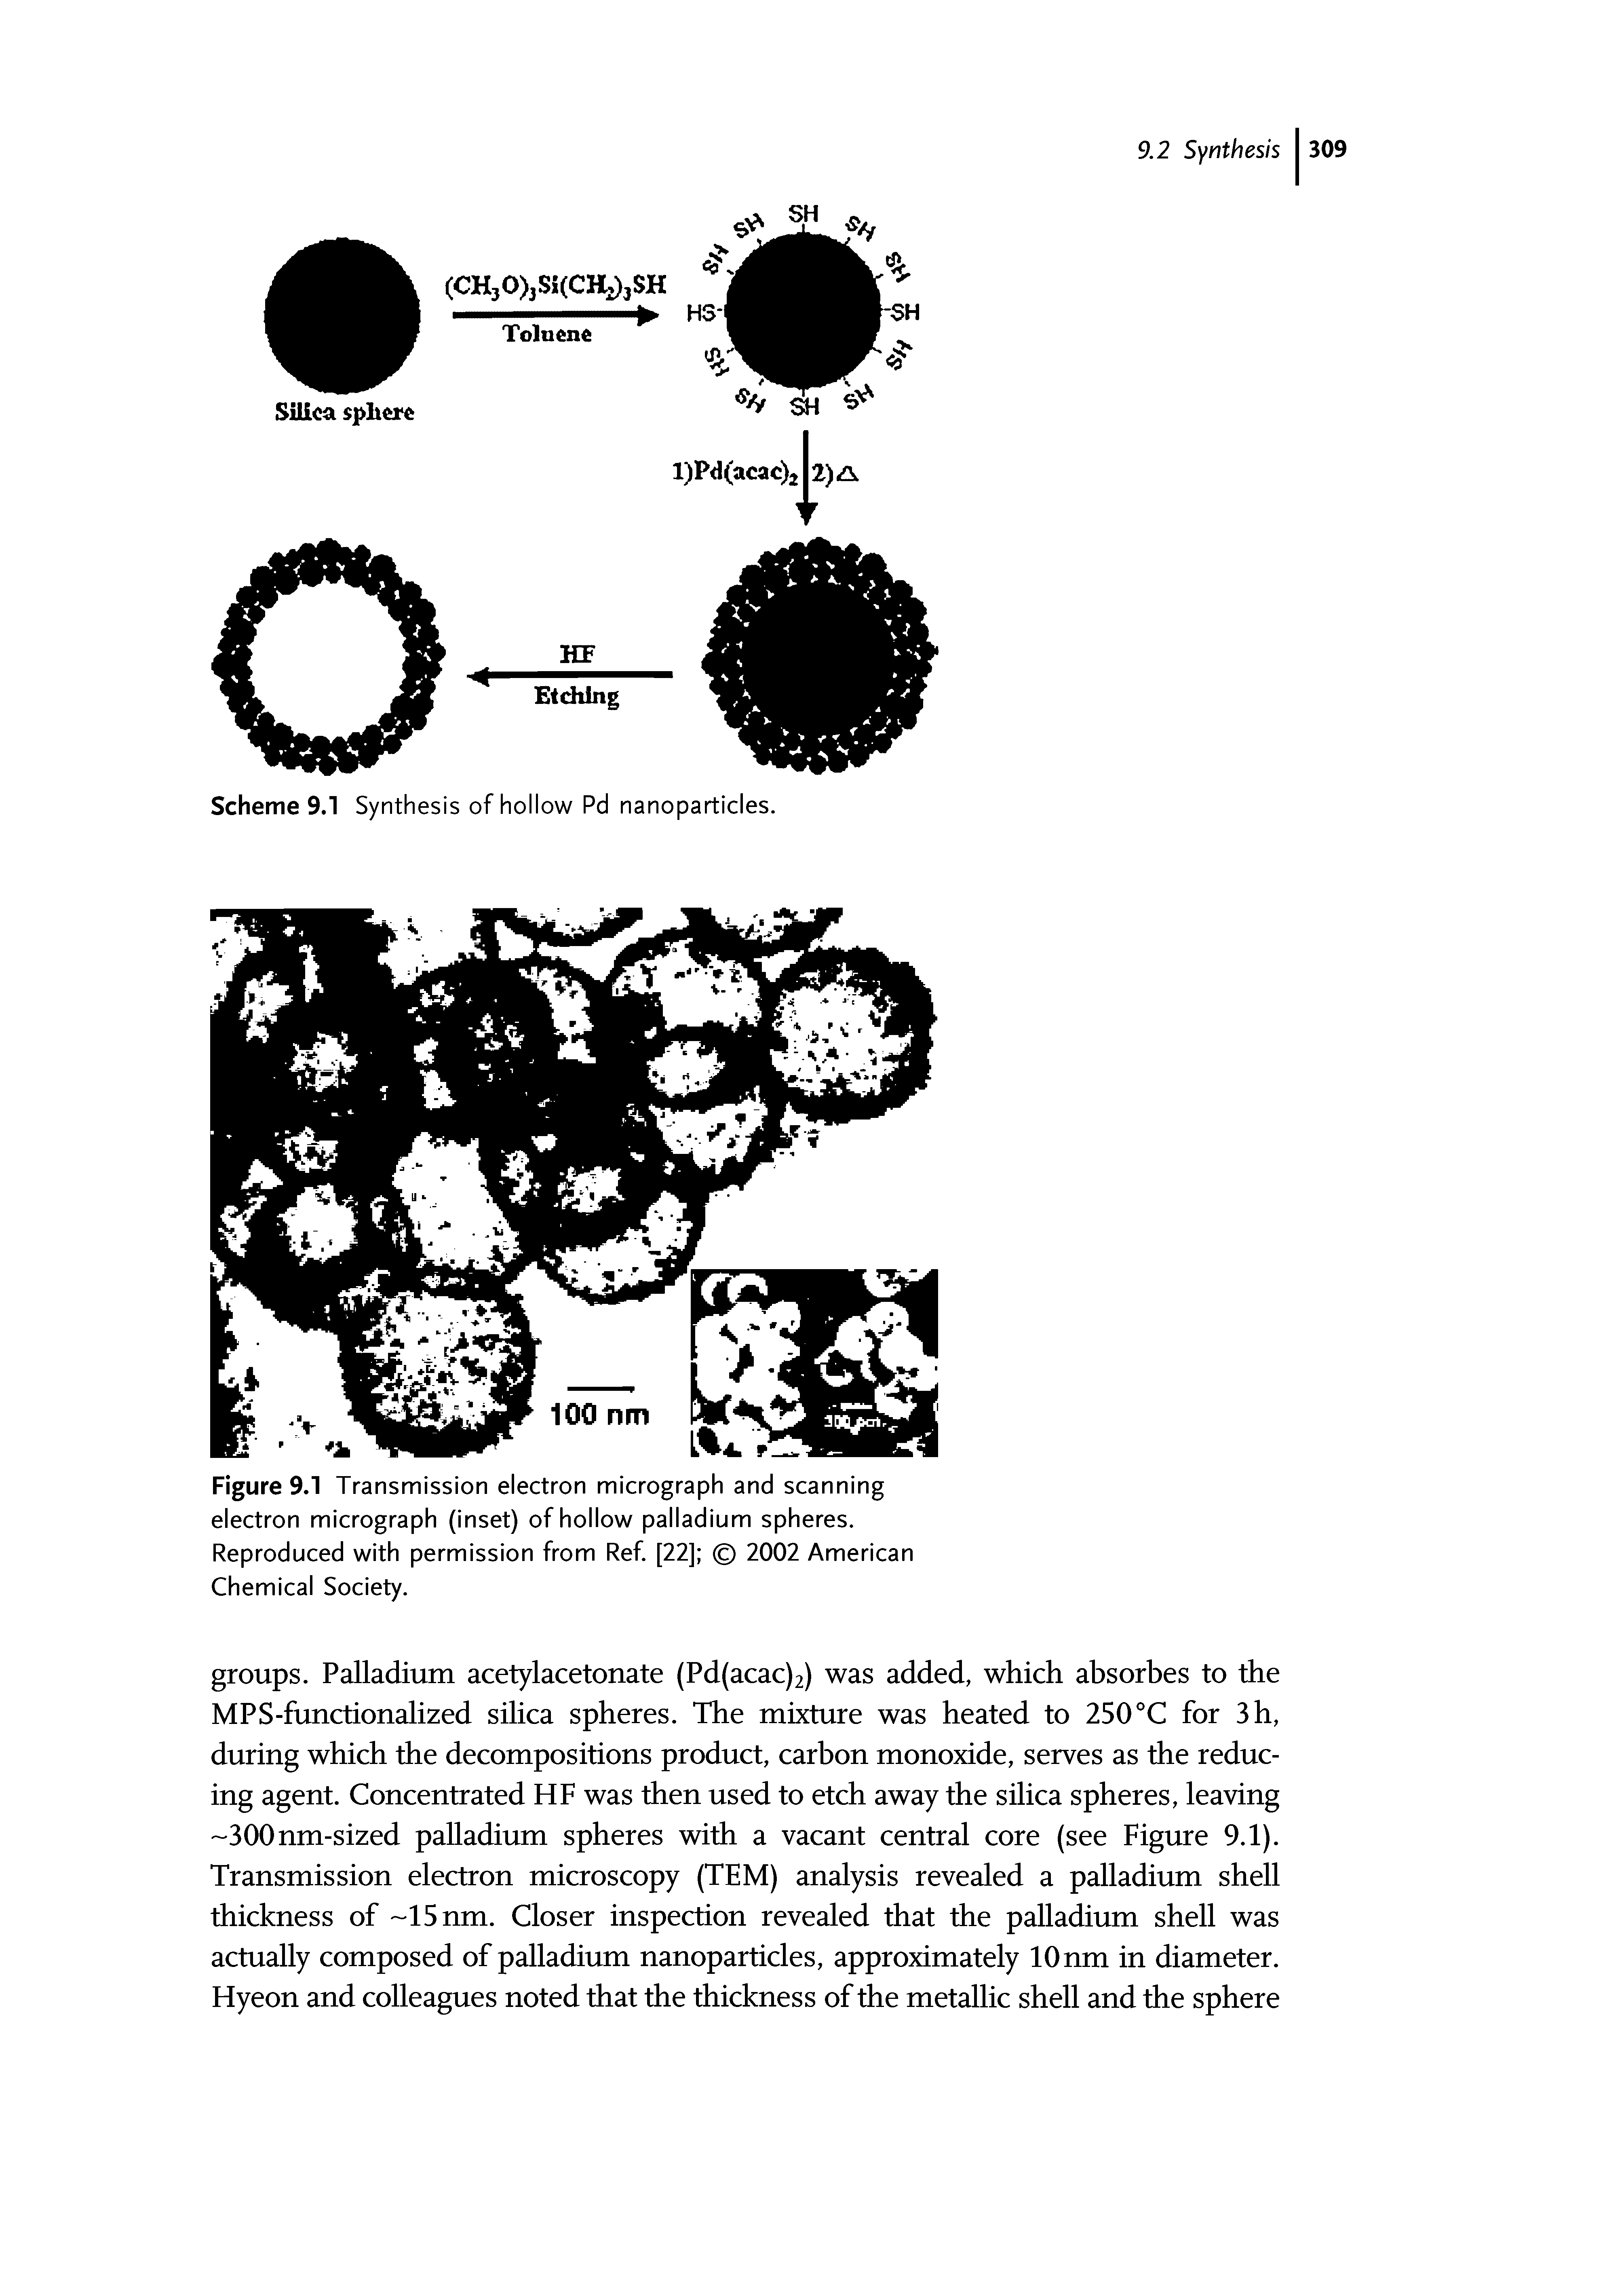 Figure 9.1 Transmission electron micrograph and scanning electron micrograph (inset) of hollow palladium spheres.